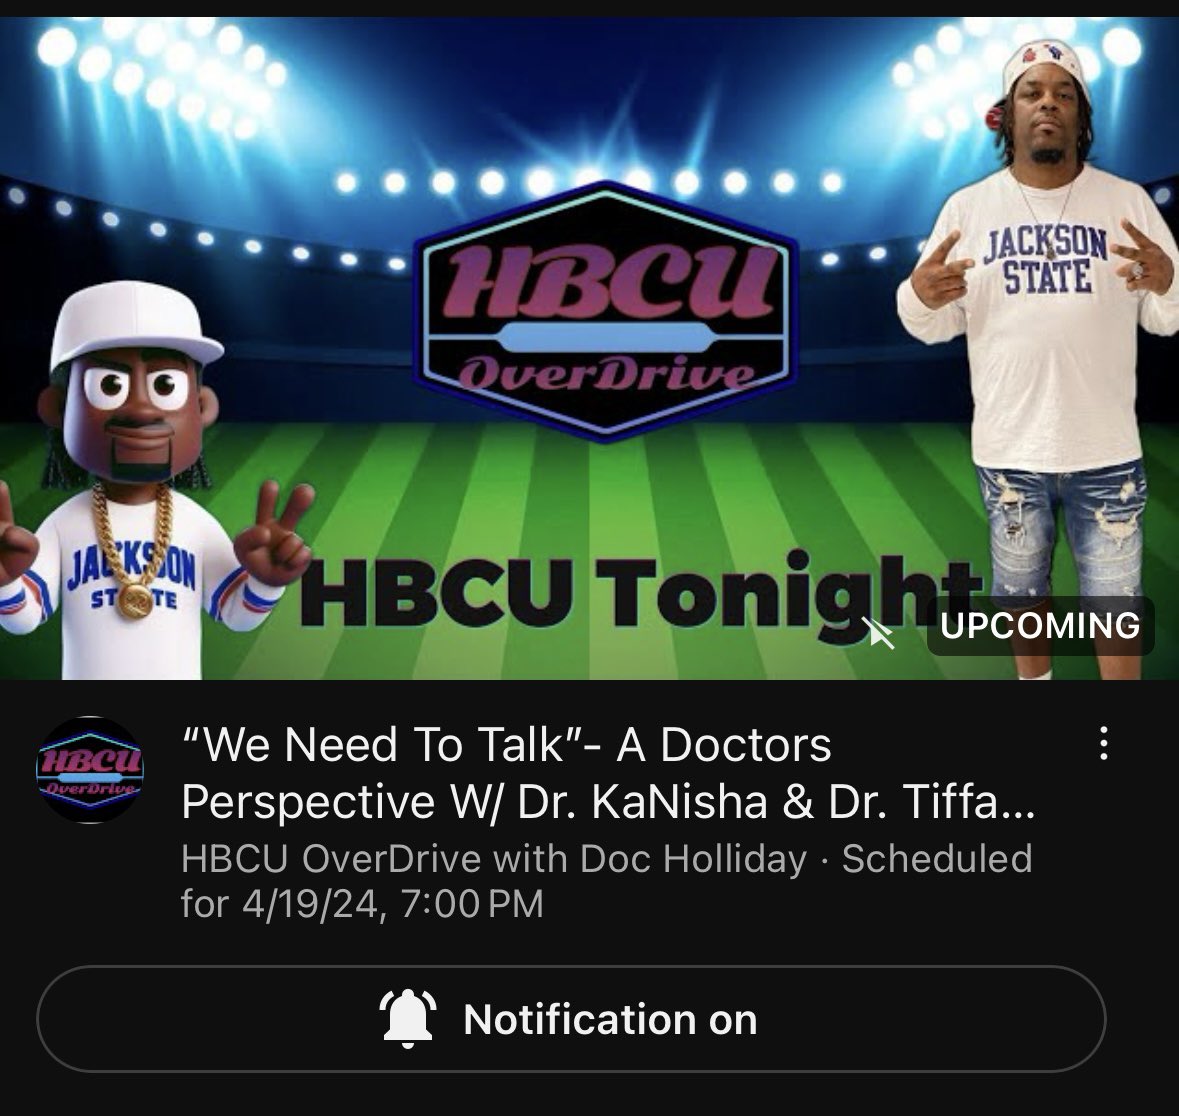 My favorite (HBCU) Yes!! HBCU doctor @DrKanisha 💁🏽‍♀️🌸❤️🔥will be live with @HBCU_OverDrive this evening to talk health &wellness!!! Make sure you are subscribed!! #NationalMinorityHealthMonth #HowardU ❤️#HBCU #SocialDeterminants #EndHealthCareDisparties